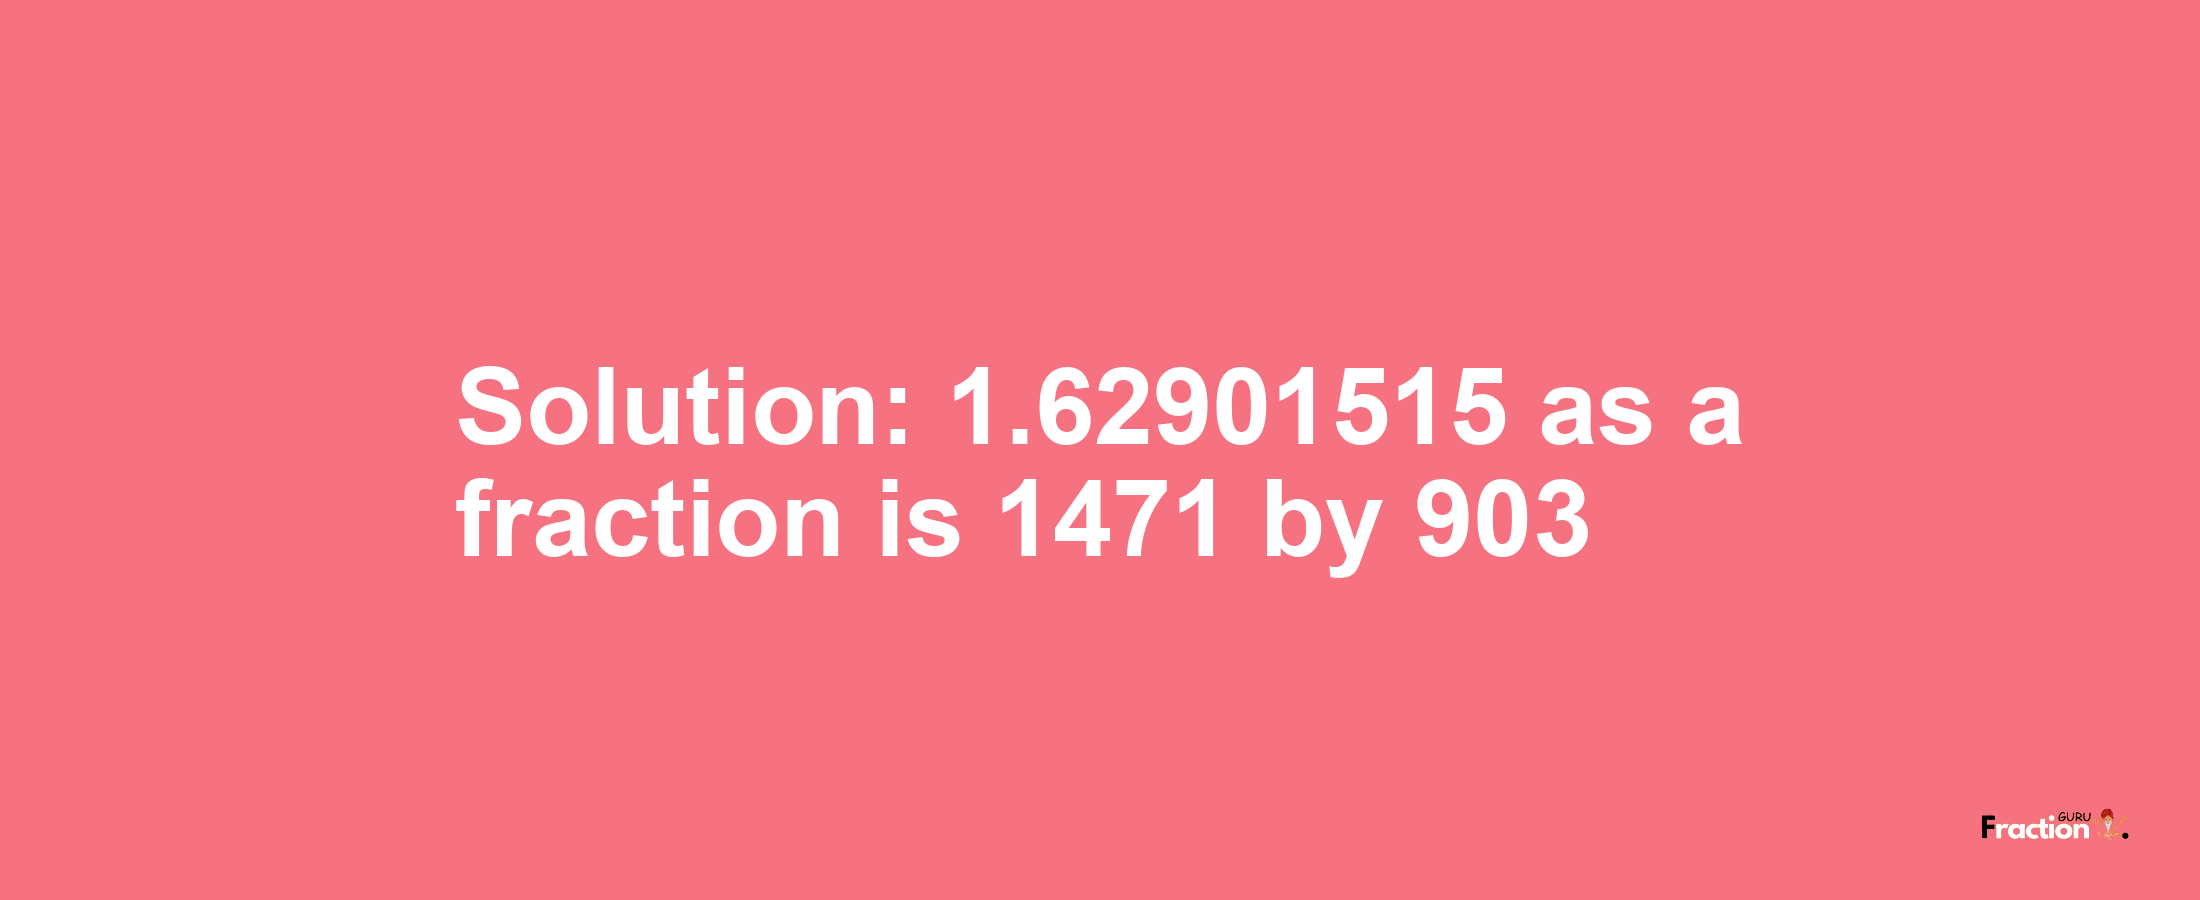 Solution:1.62901515 as a fraction is 1471/903